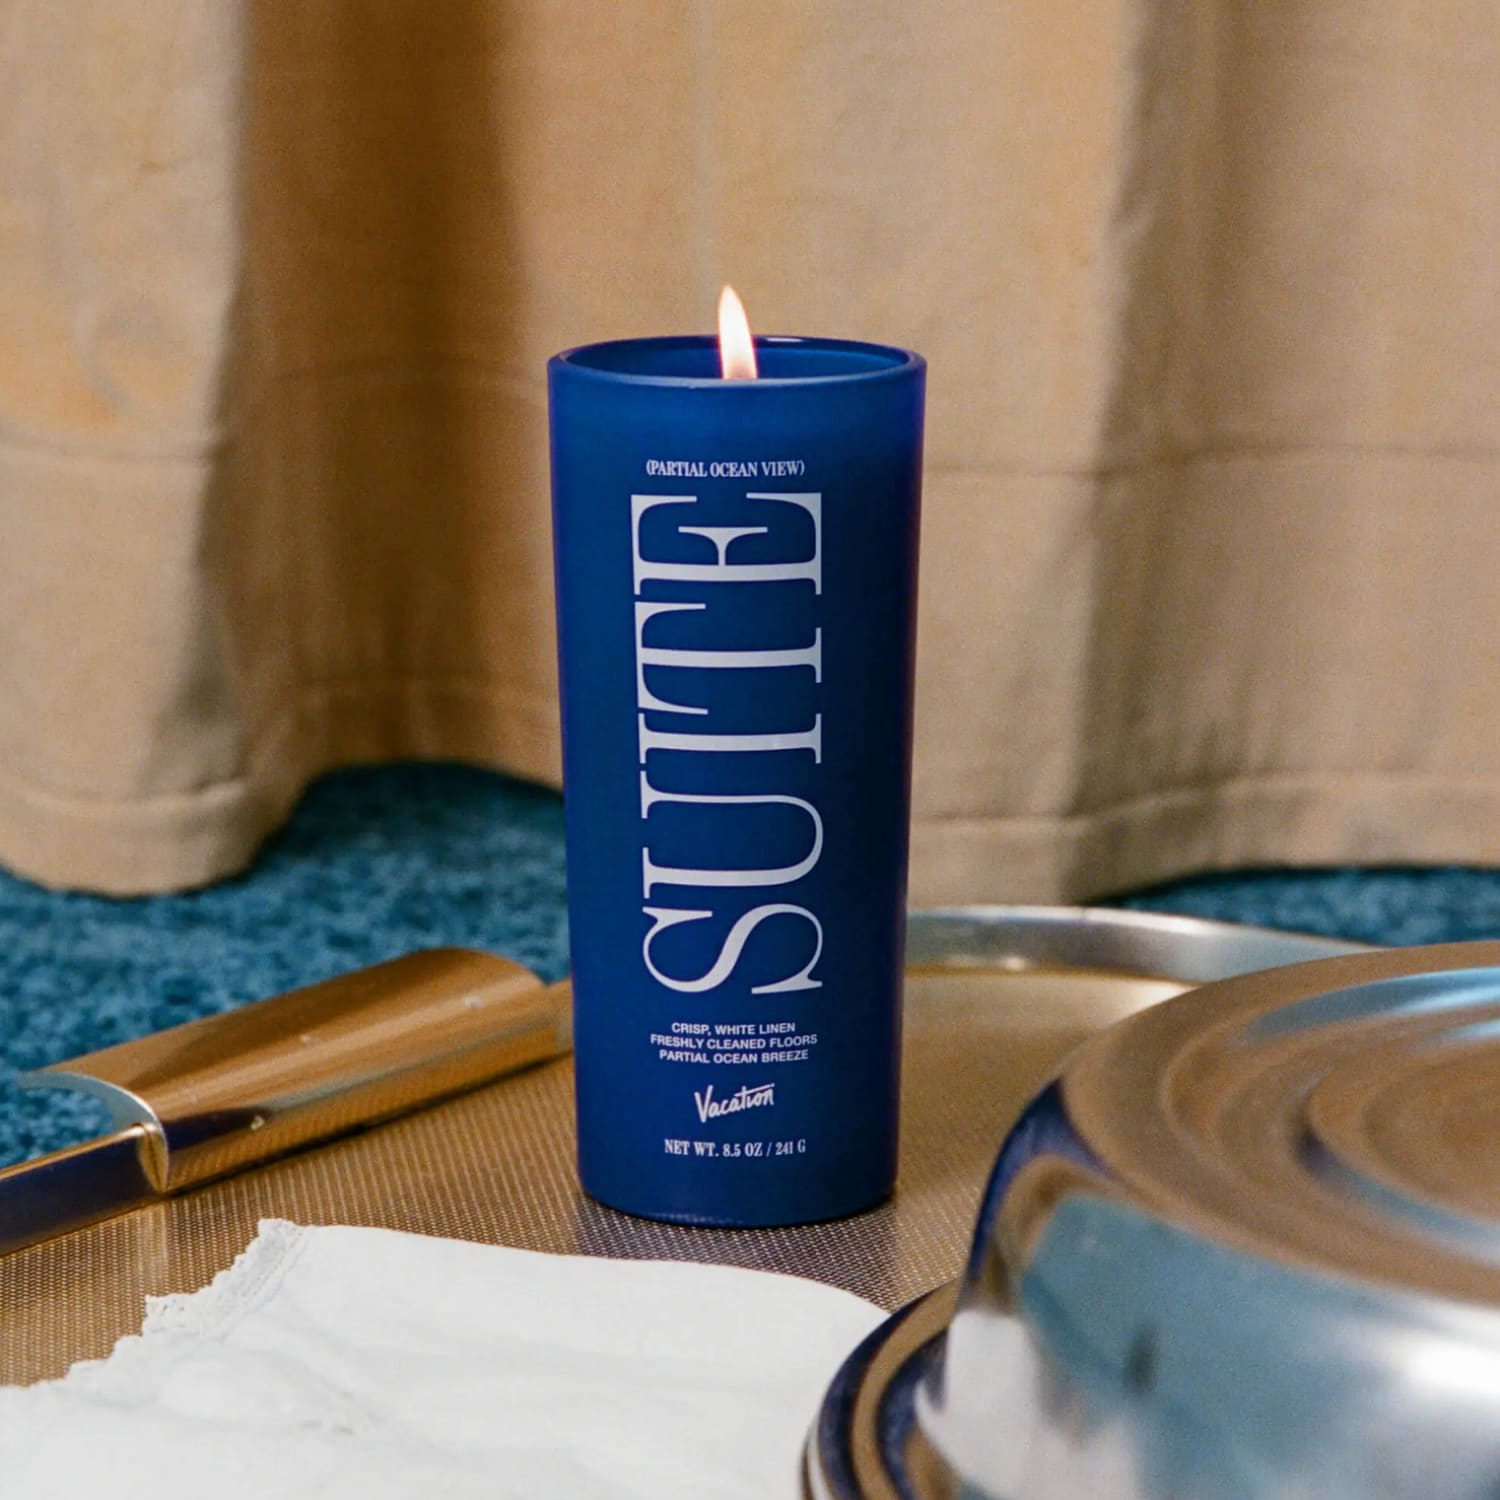 Partial Ocean View Suite Candle Candle